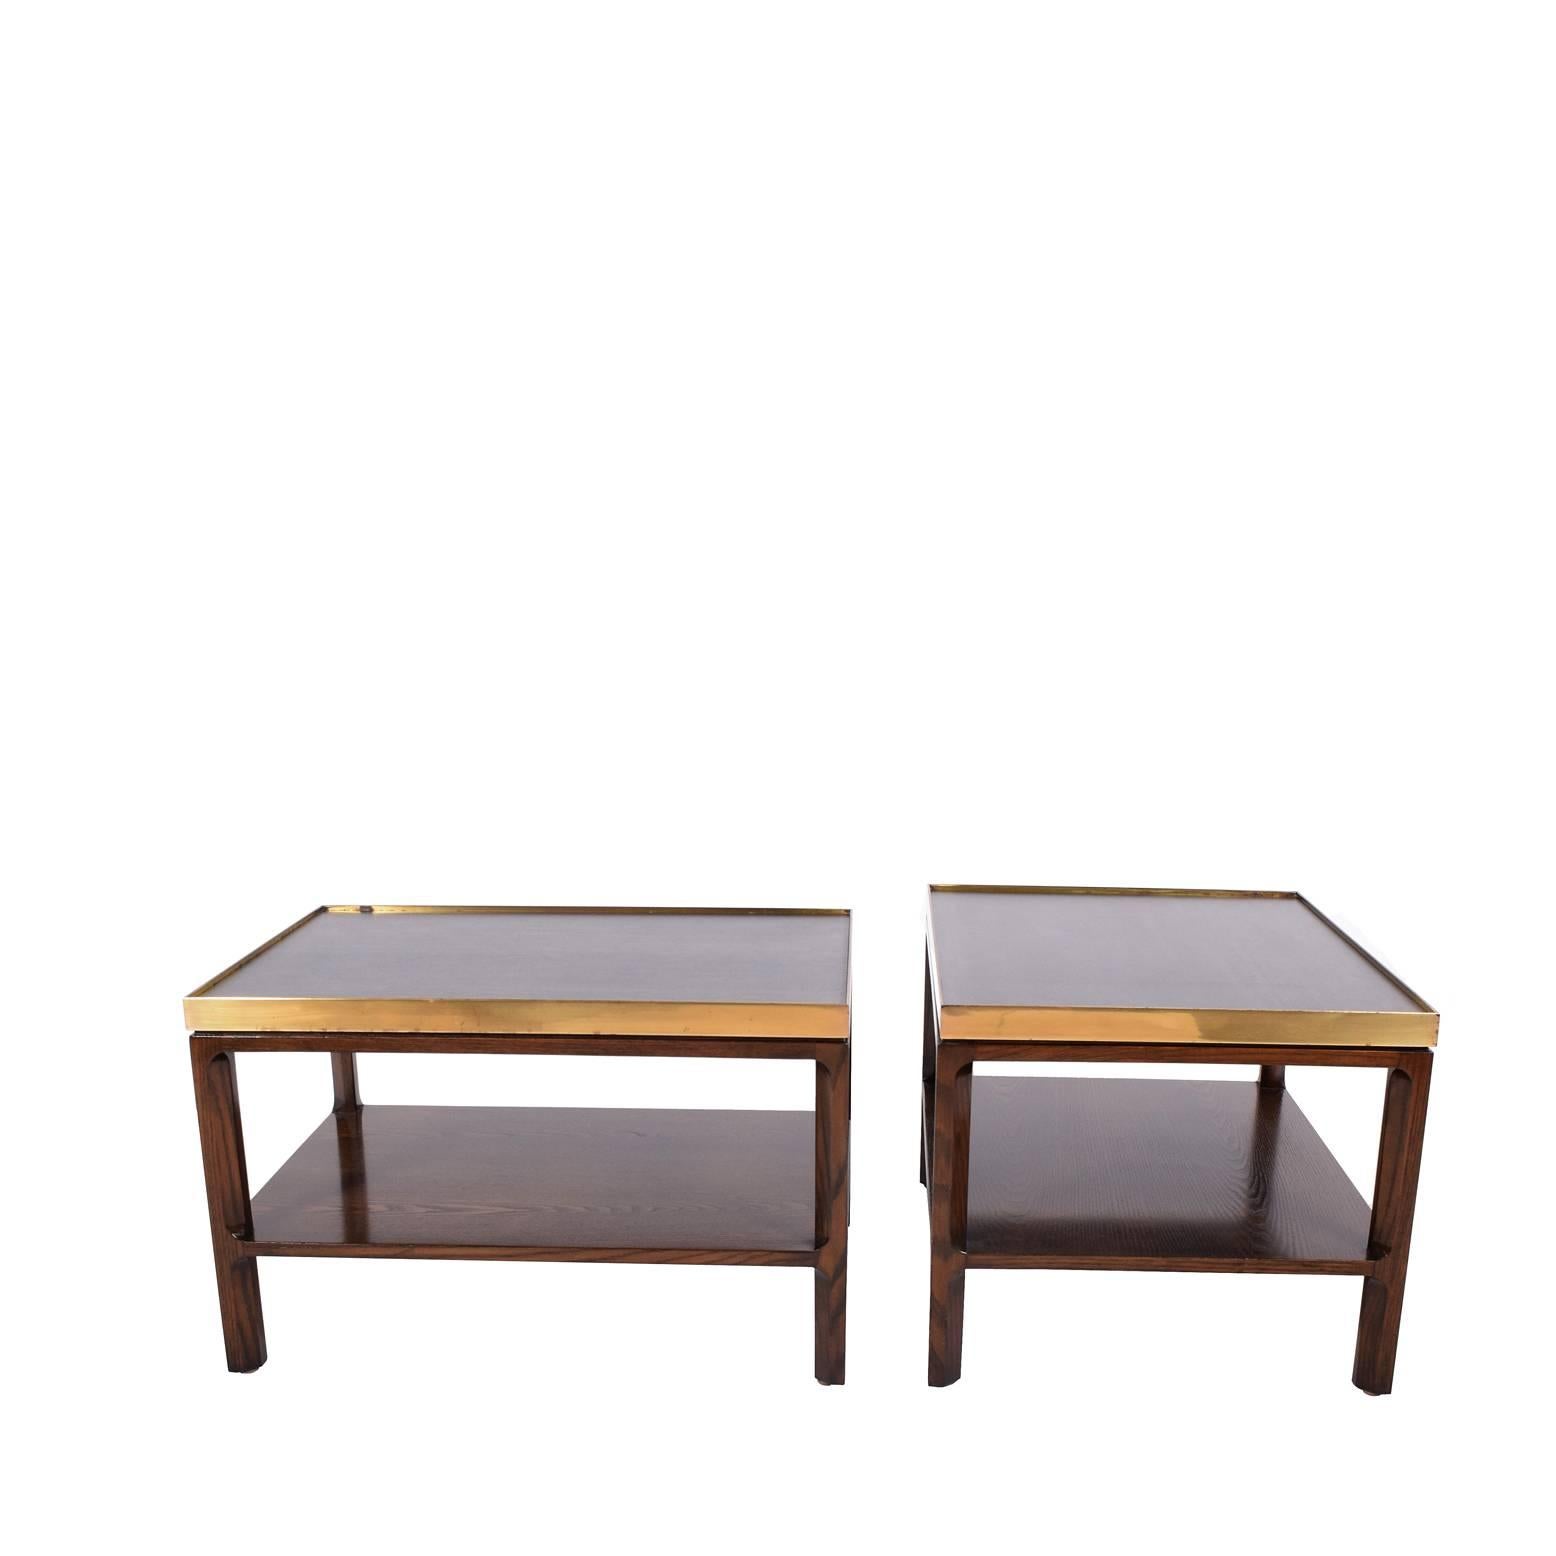 Pair of side tables with brass frame and laminate top on stain wood. Big D Dunbar label on each table.